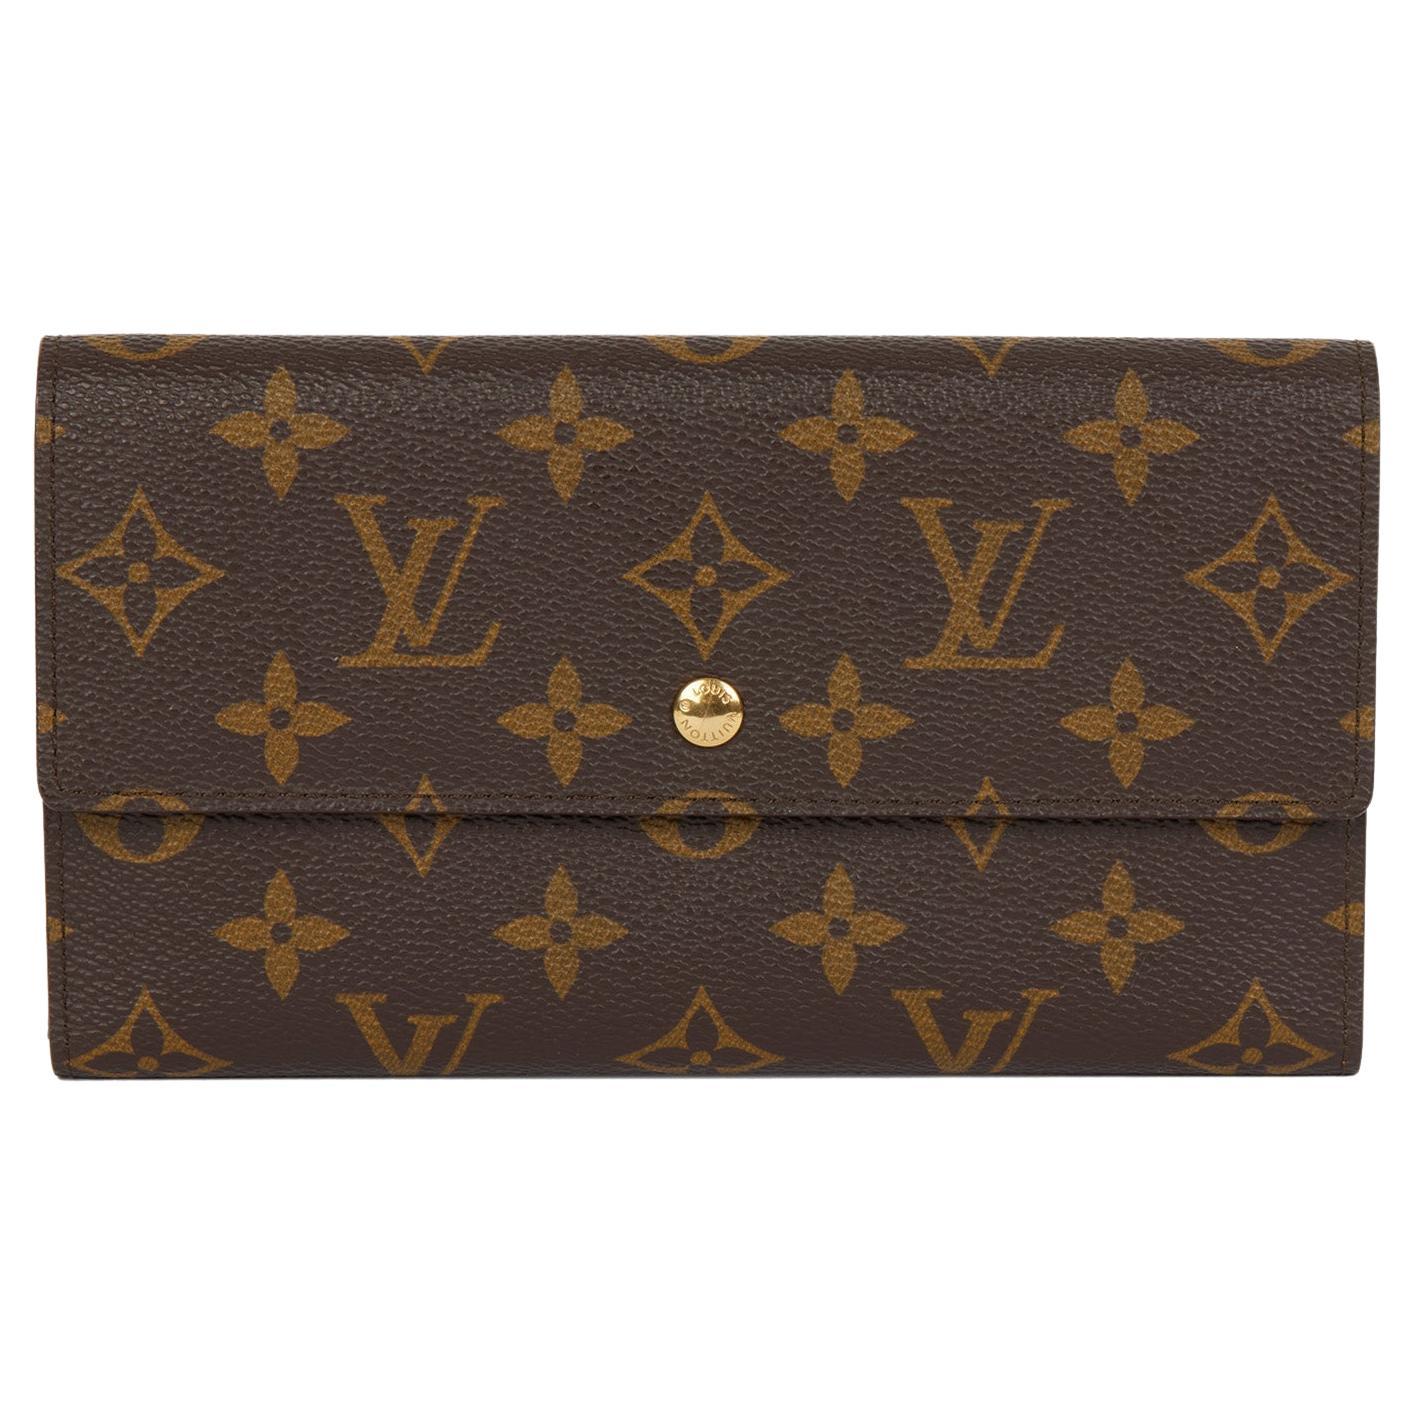 Vintage Louis Vuitton Wallet - 12 For Sale on 1stDibs